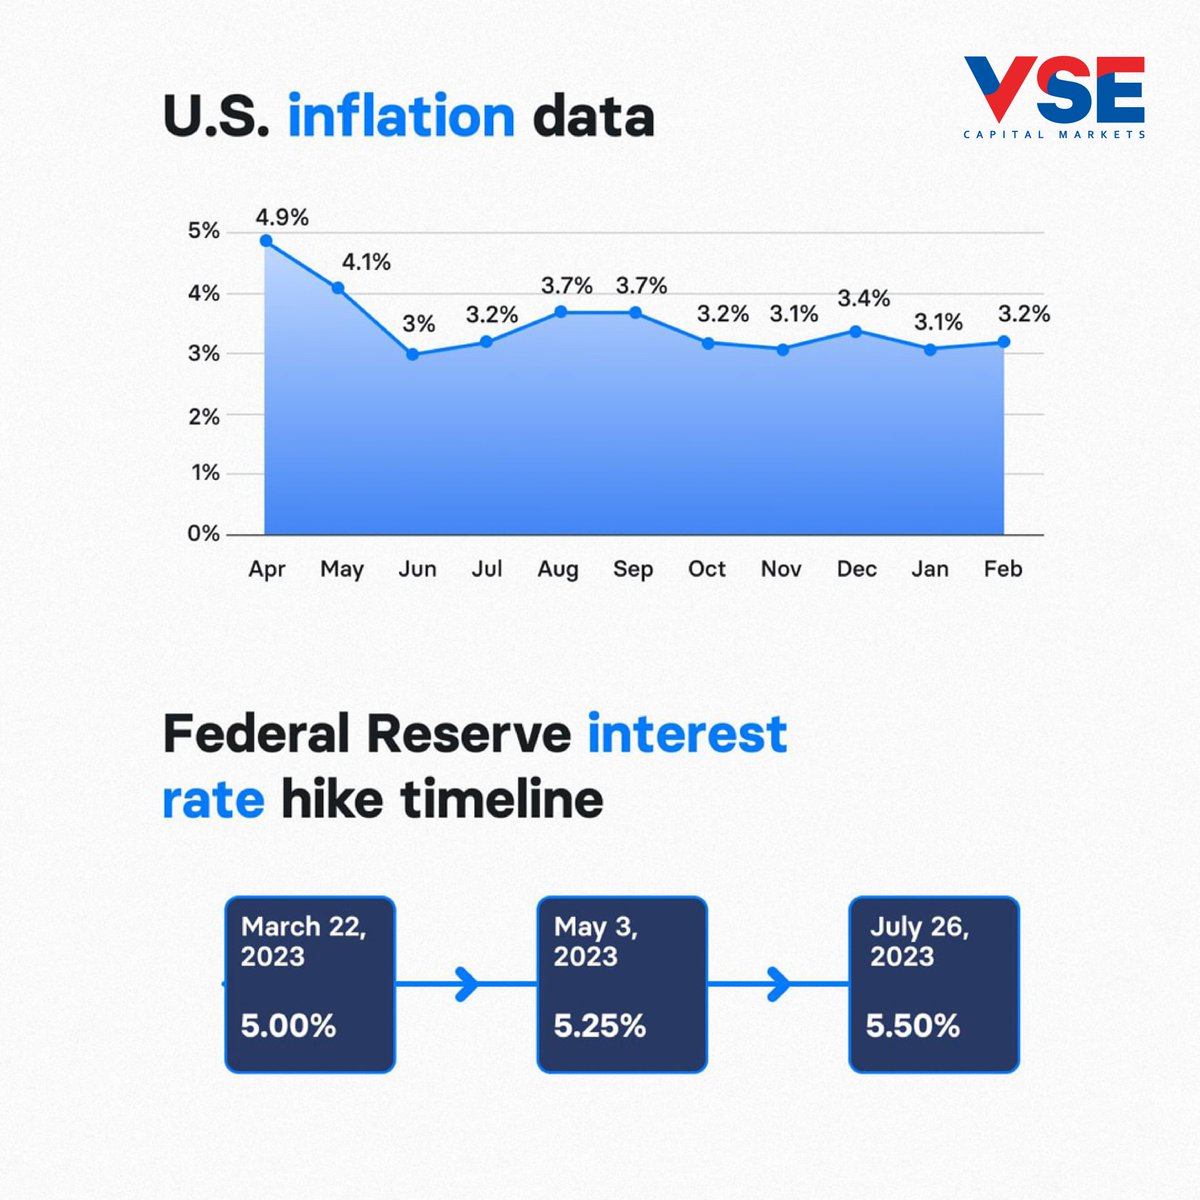 Insights from the US Stock Market: FY 2023-2024

Visit us: vselindia.com

#VSE #StockMarket #inflation #fiscalyear #financialinsights #investors #FinancialLiteracy